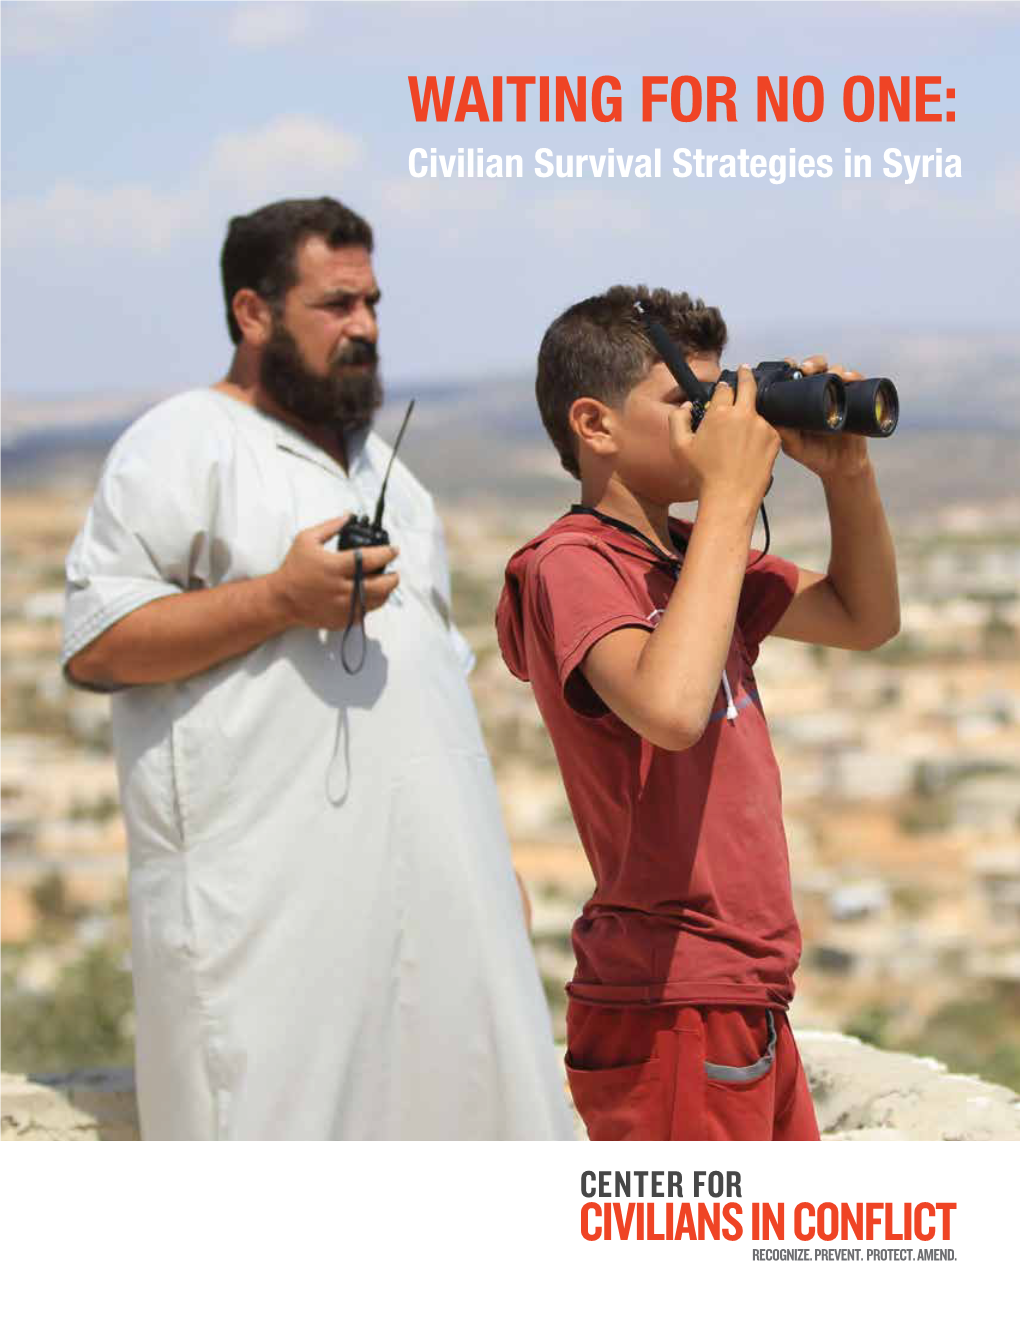 WAITING for NO ONE: Civilian Survival Strategies in Syria